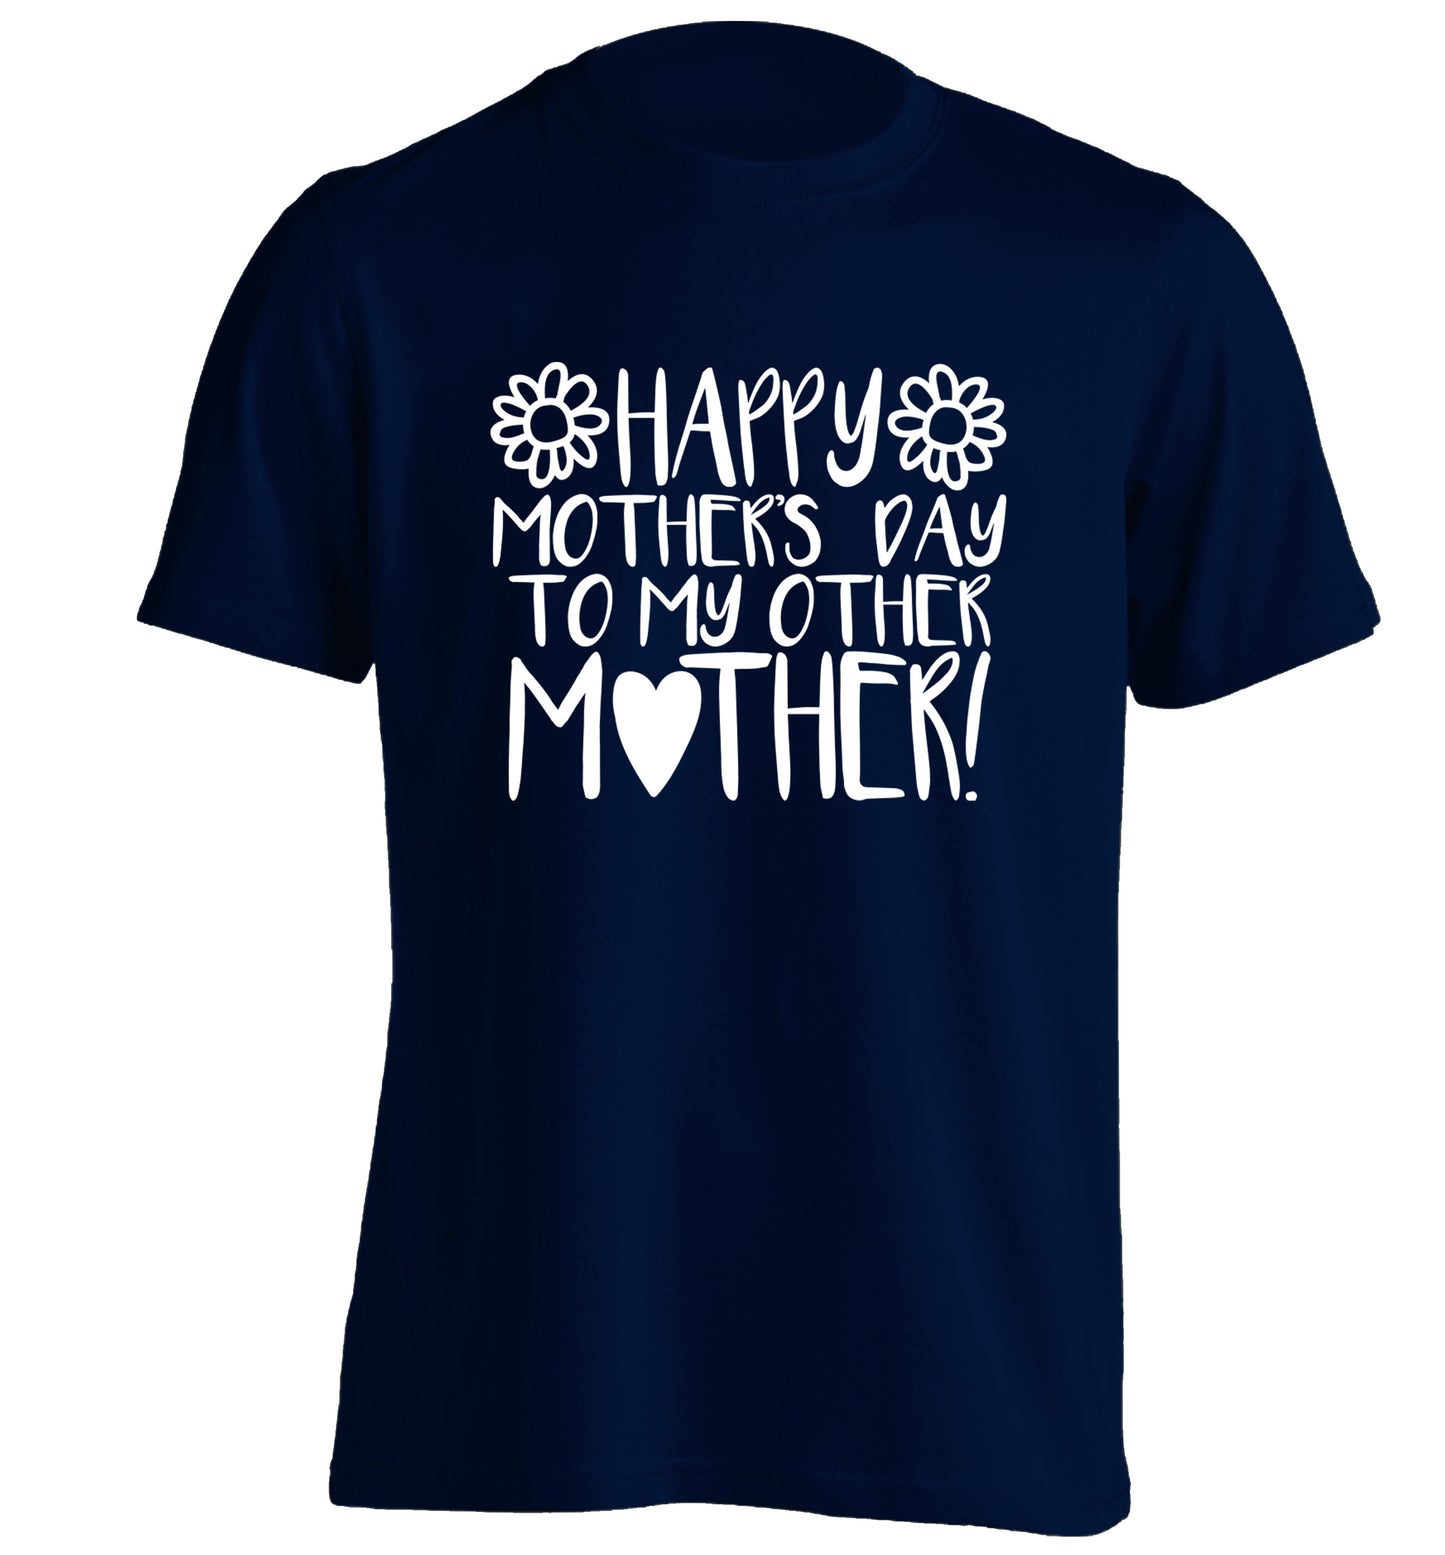 Happy mother's day to my other mother adults unisex navy Tshirt 2XL